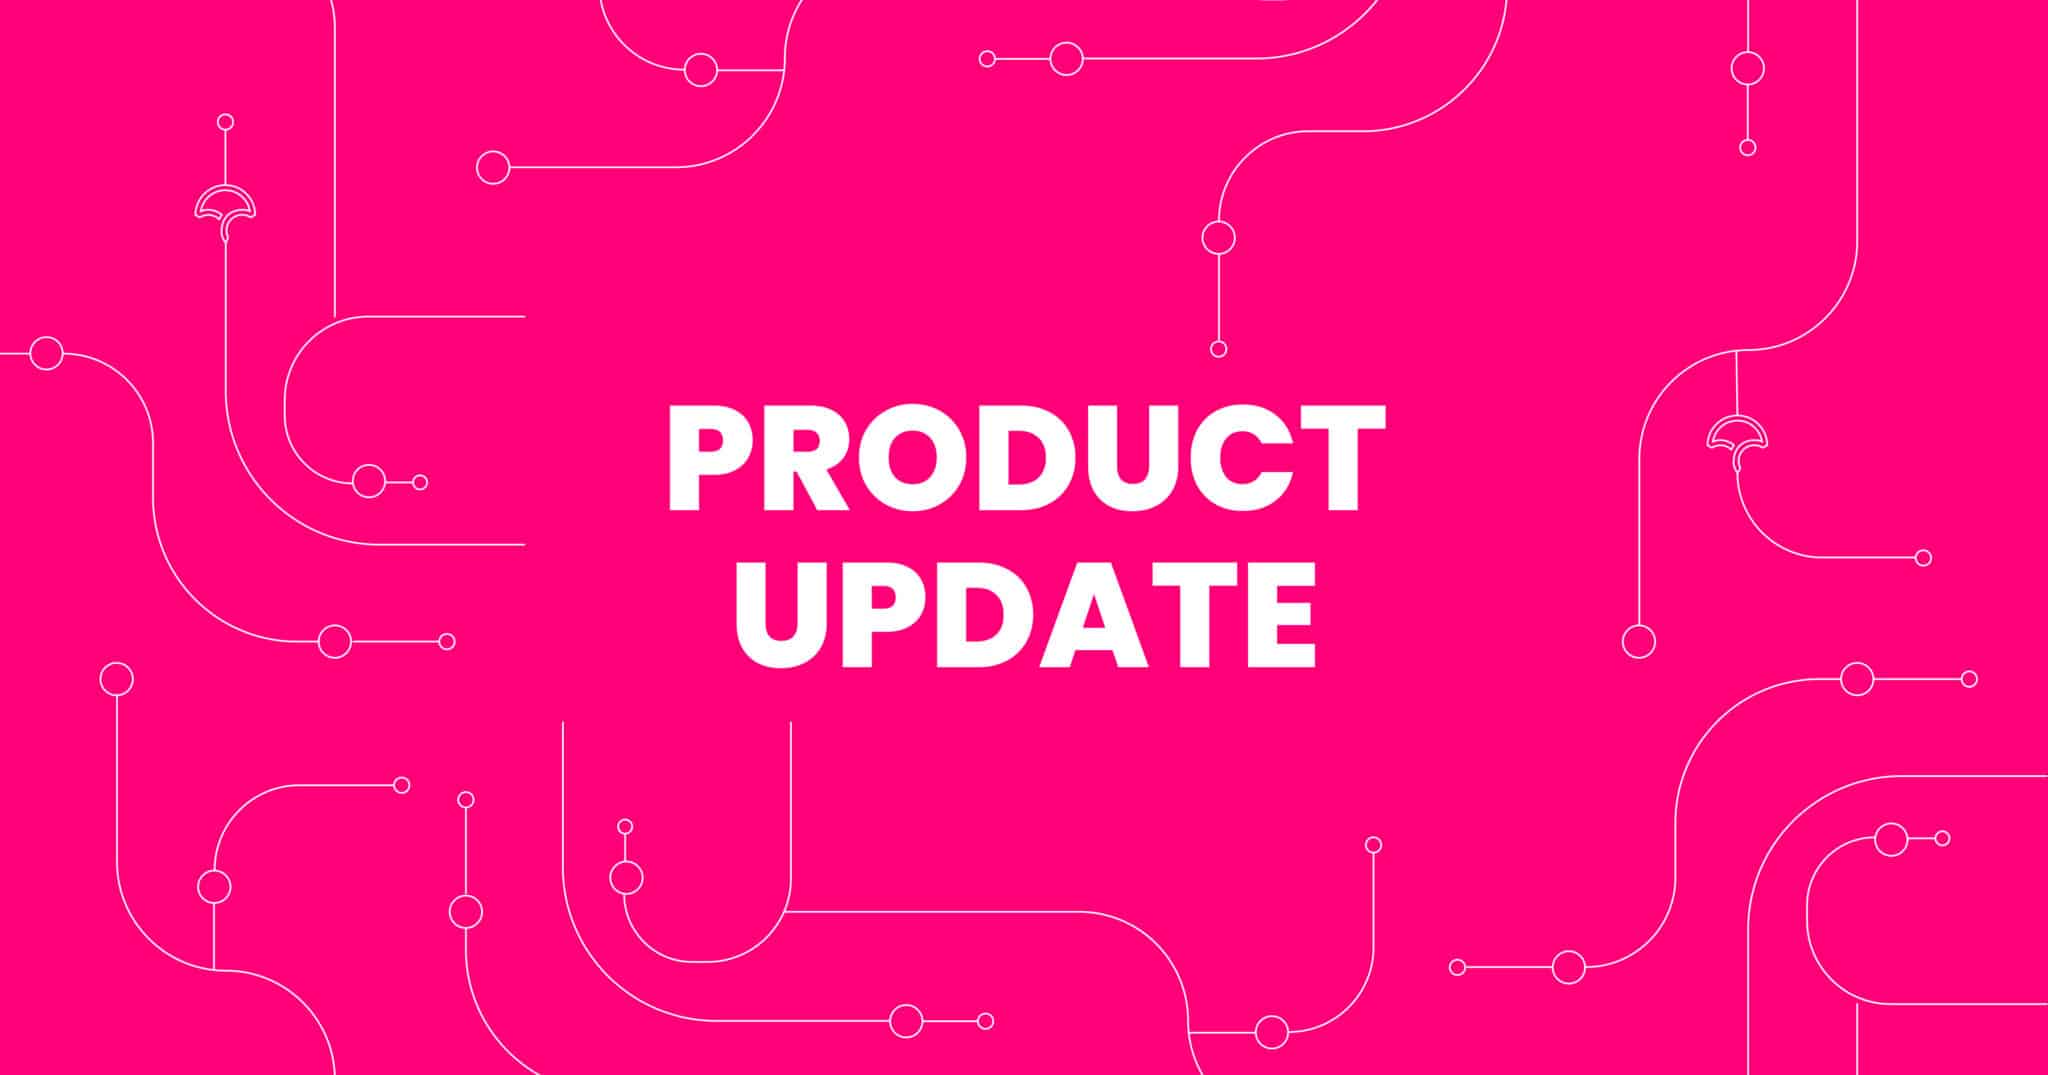 Product Update on a Pink Background with Electrical Nodes